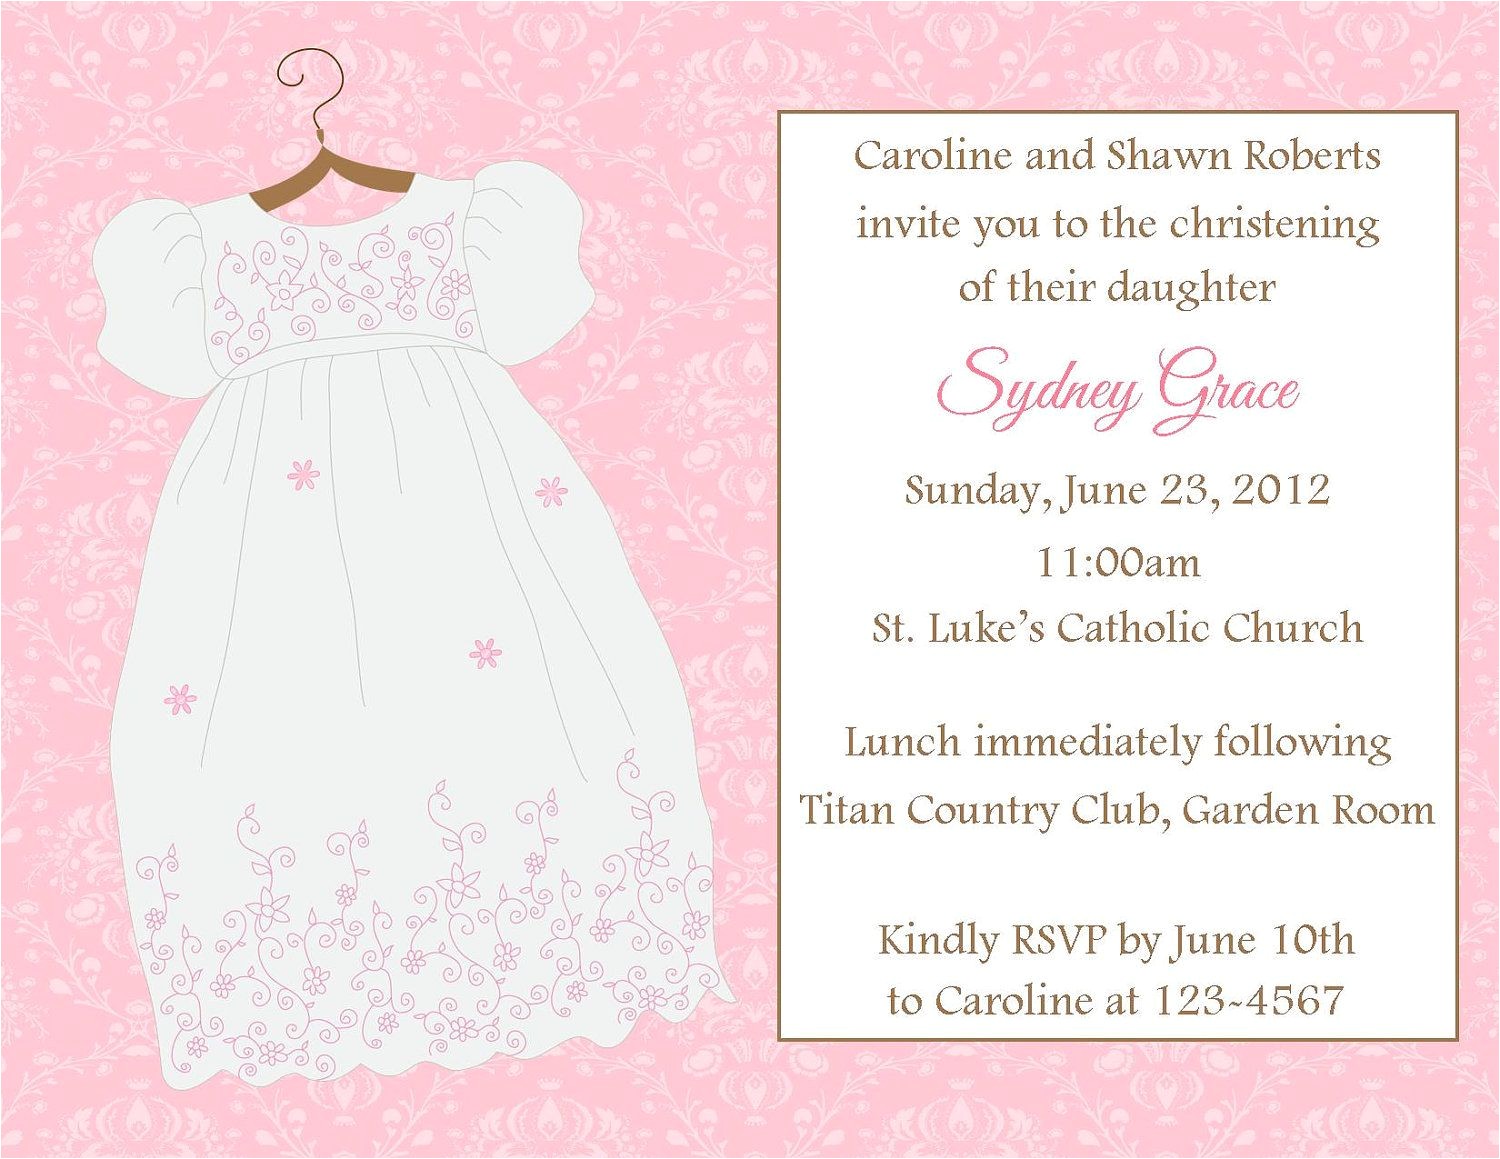 Baby Girl Baptism Invitation Free Templates 31 Awesome Baptismal Background for Baby Girl Images